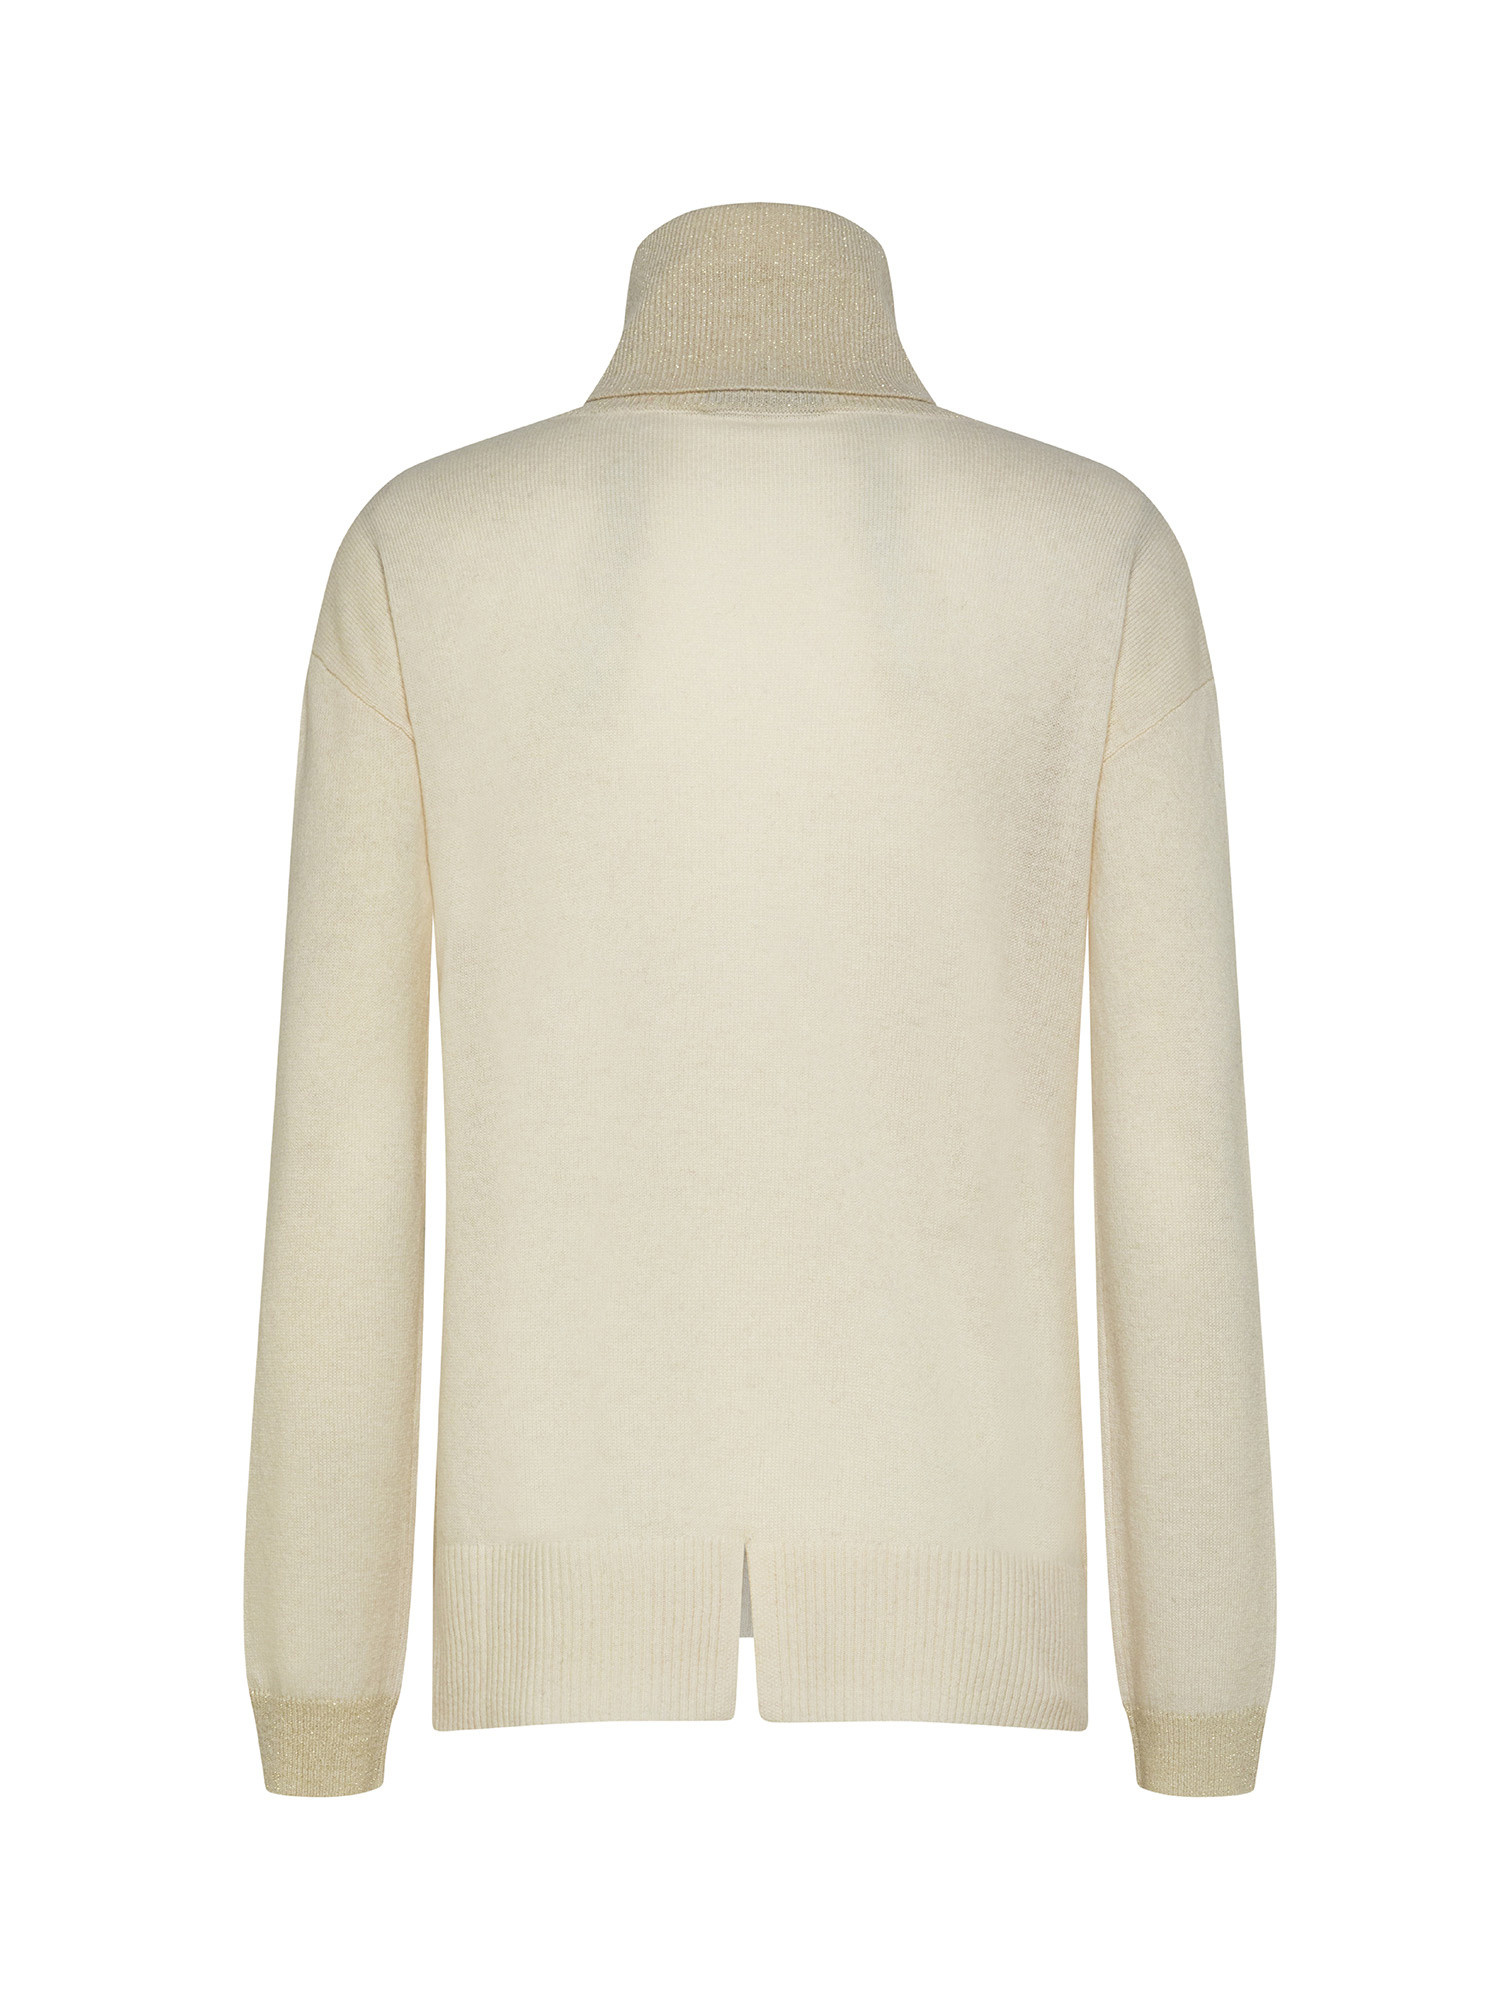 Koan - Wool and cashmere turtleneck pullover, White, large image number 1